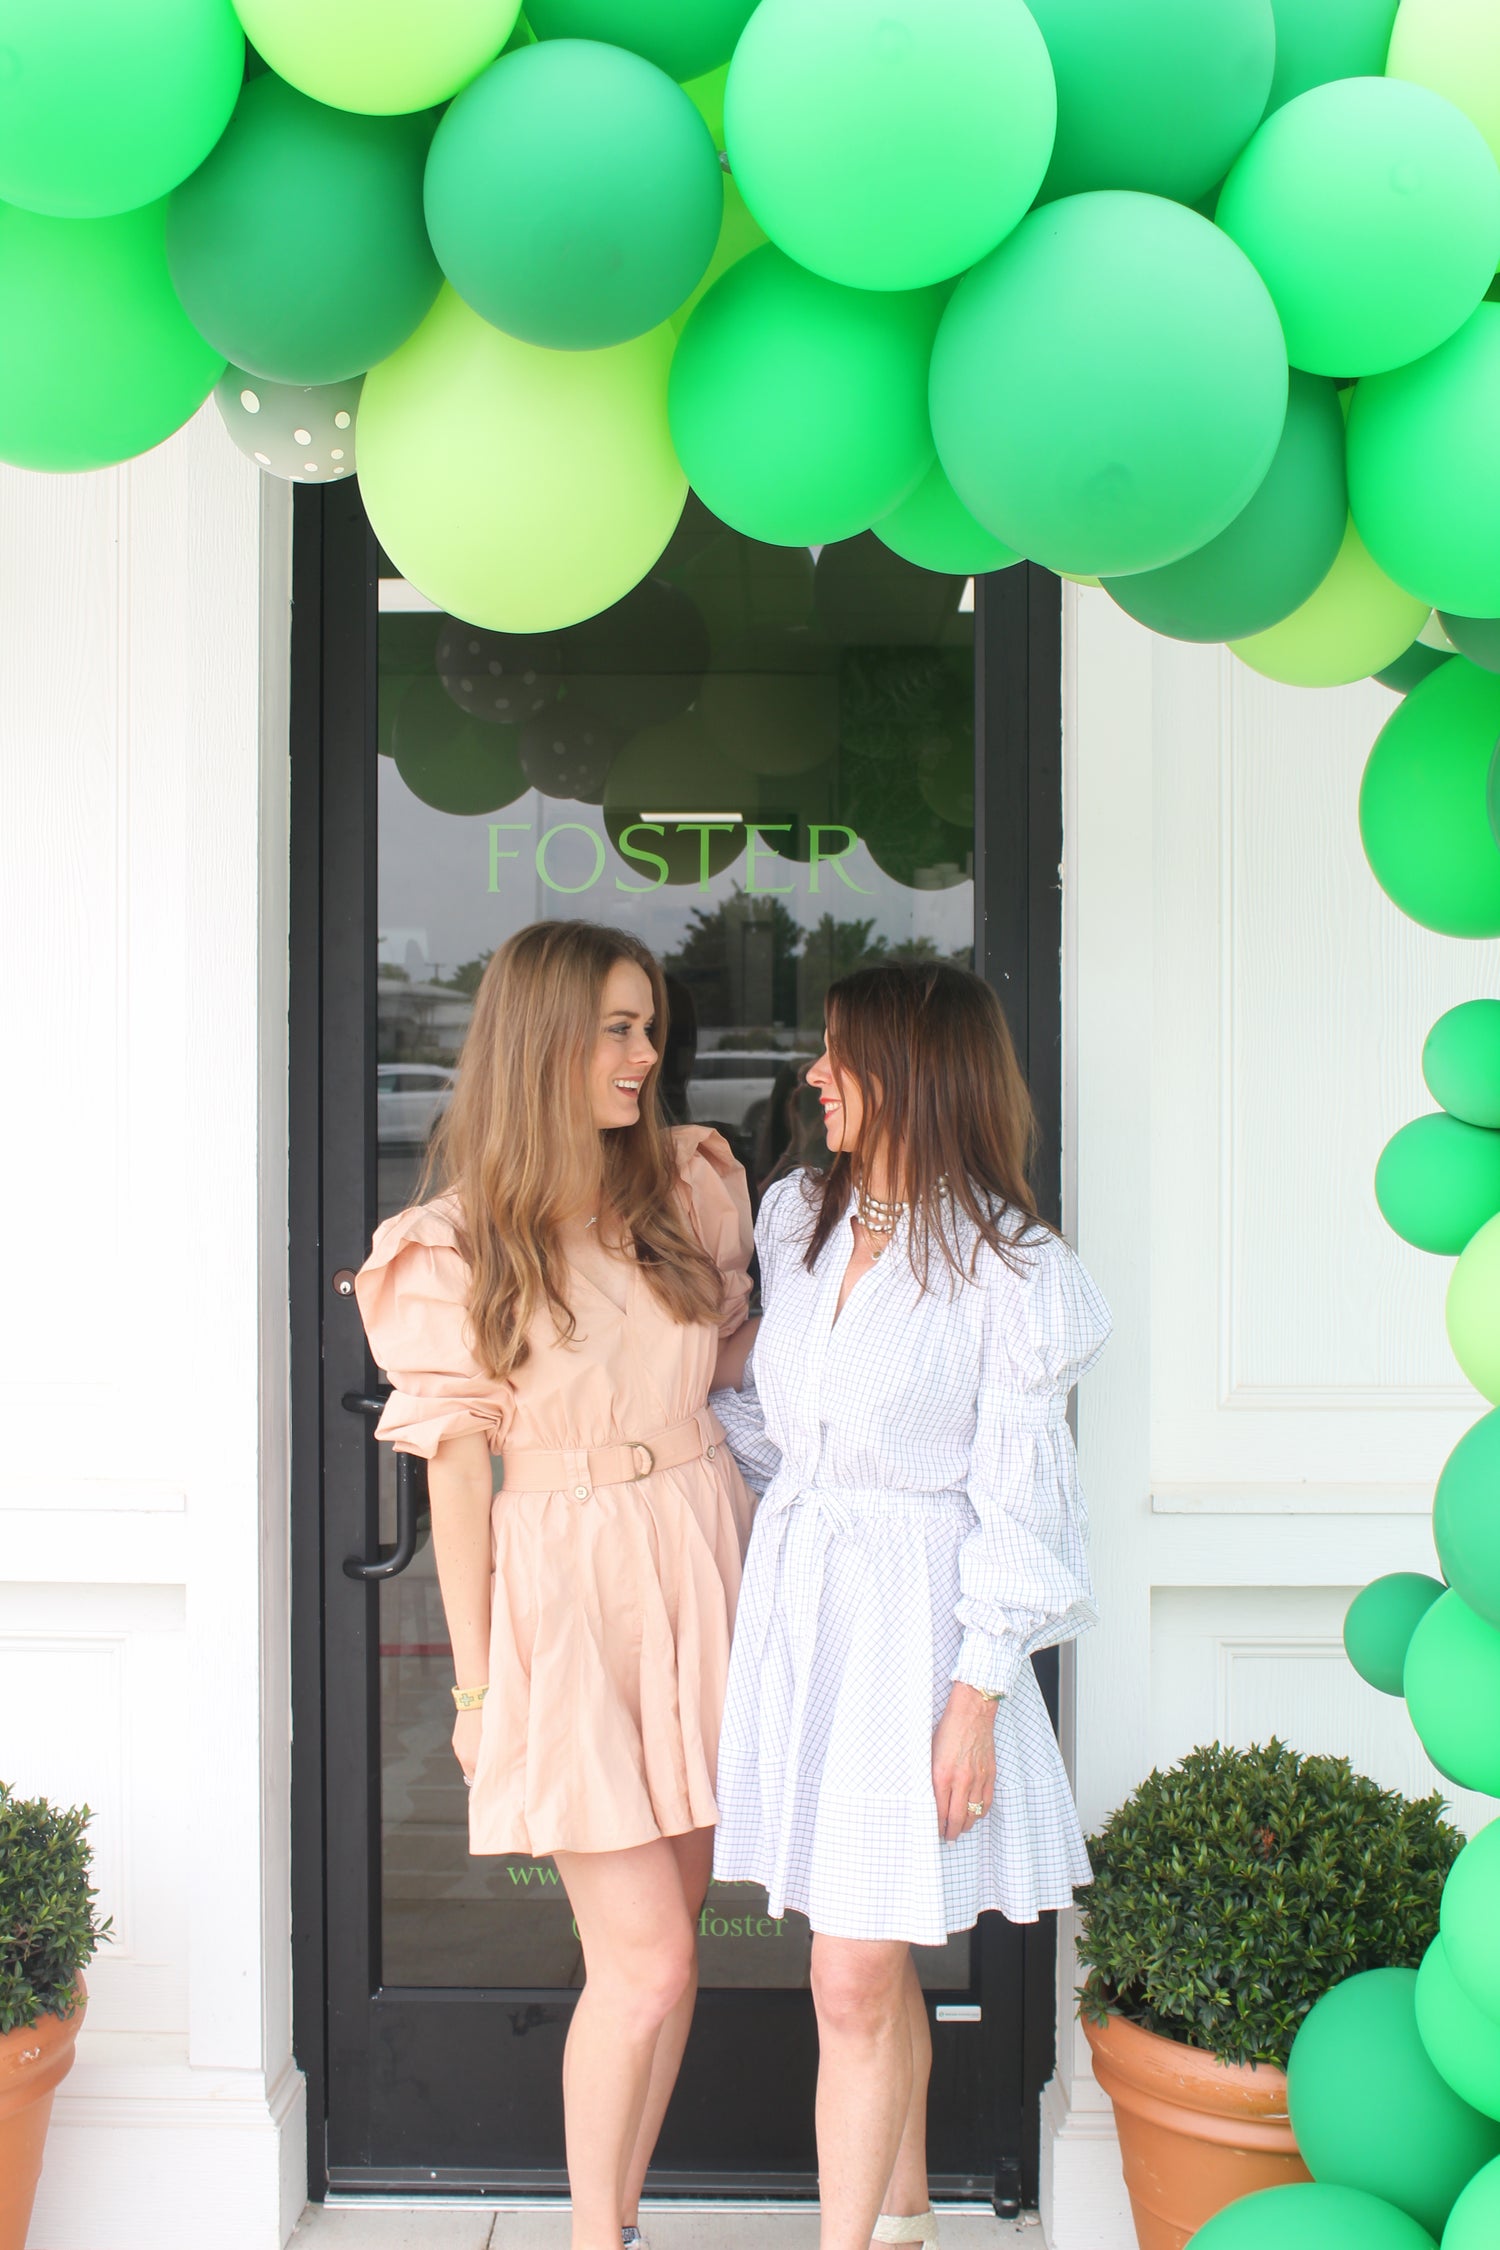 FOSTER mother-daughter co-founders at FOSTER office and store in Tyler